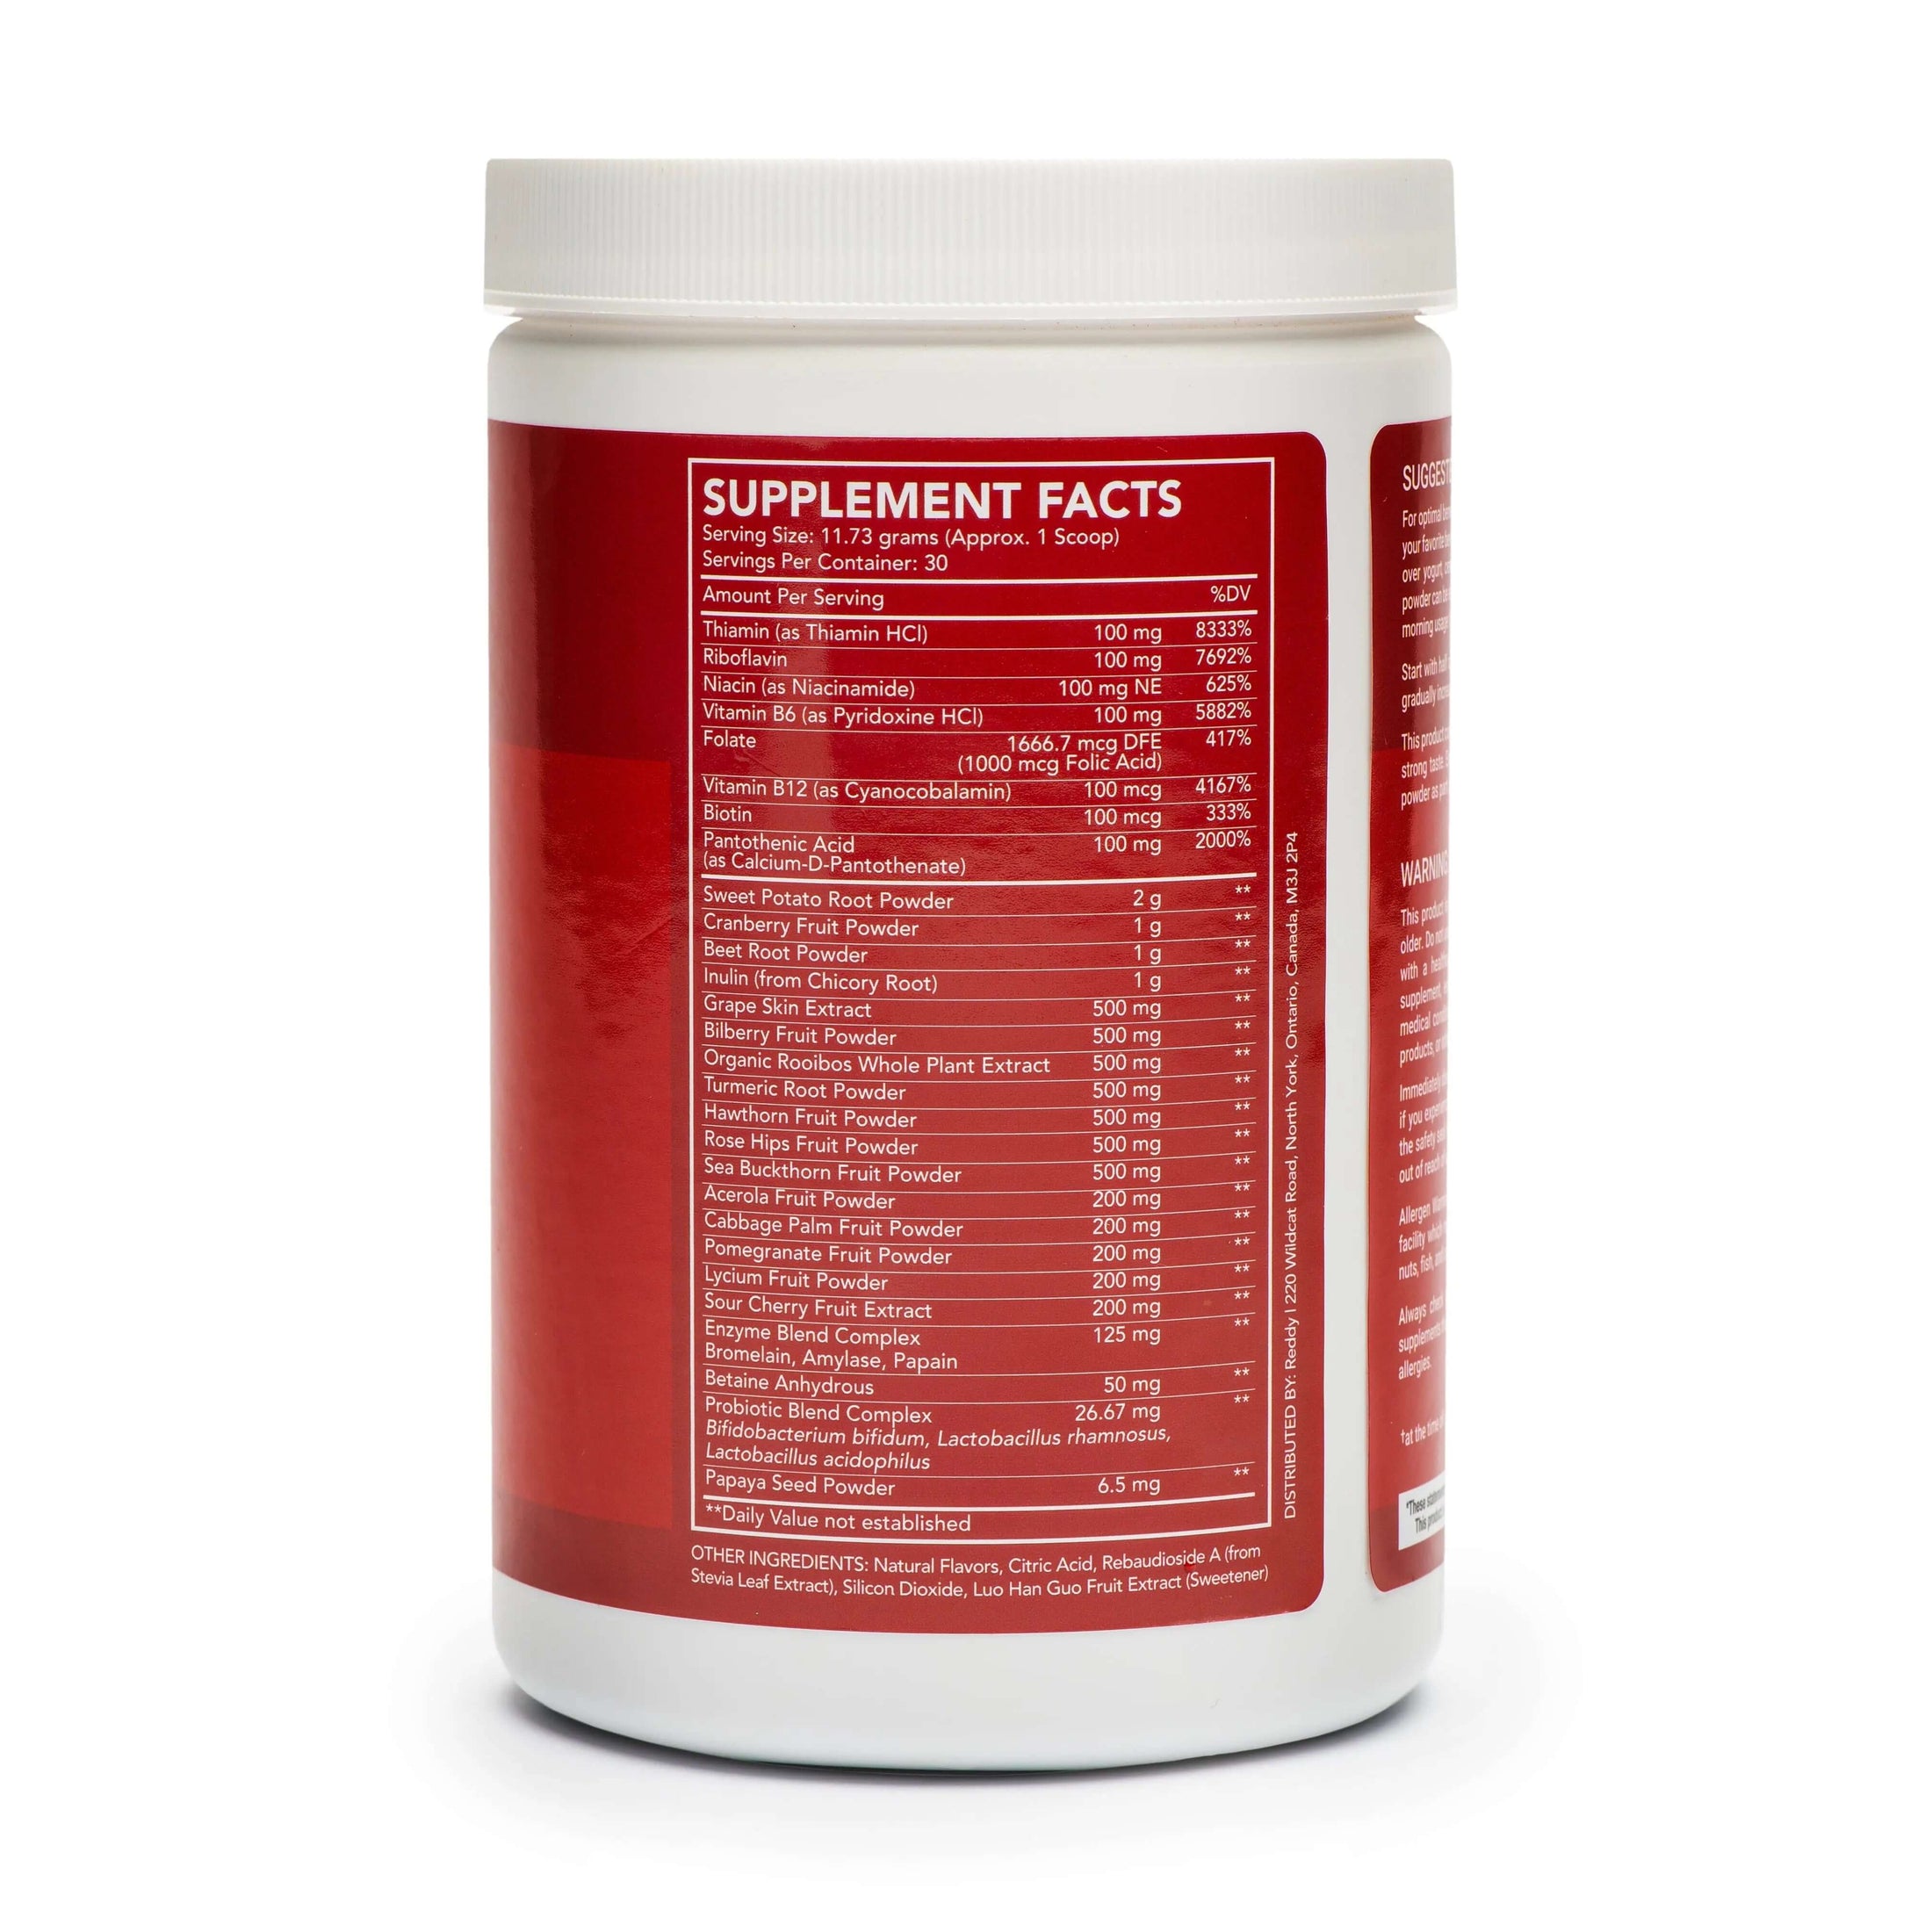 Detailed image of the nutritional label on the back of Reddy Red Organic Superfood Powder packaging, highlighting key vitamins and organic sources, ensuring transparency and trust.